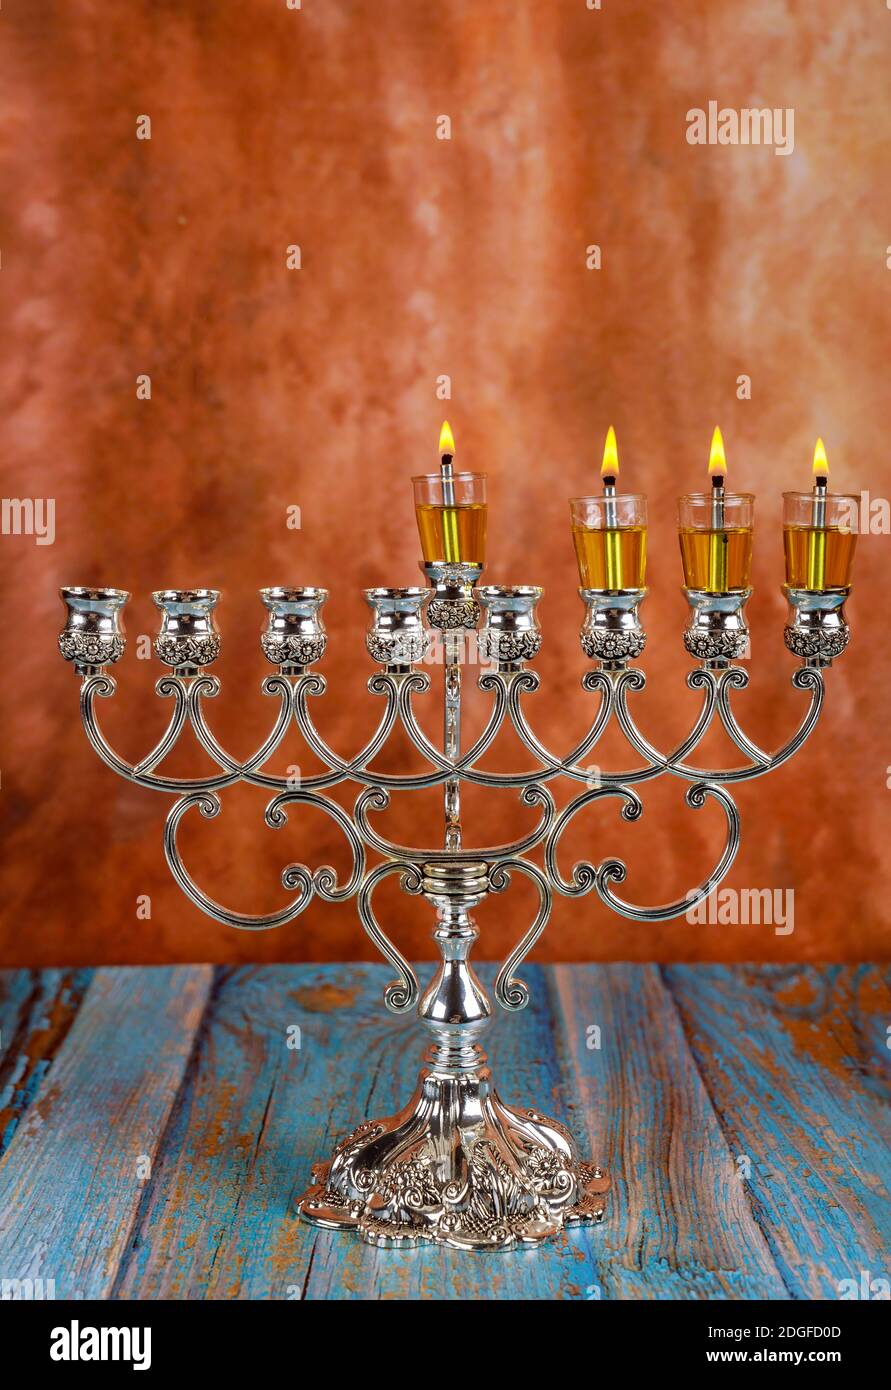 Lights candles on the third day of the Jewish holiday Hanukkah. candles are burning light of menorah Stock Photo